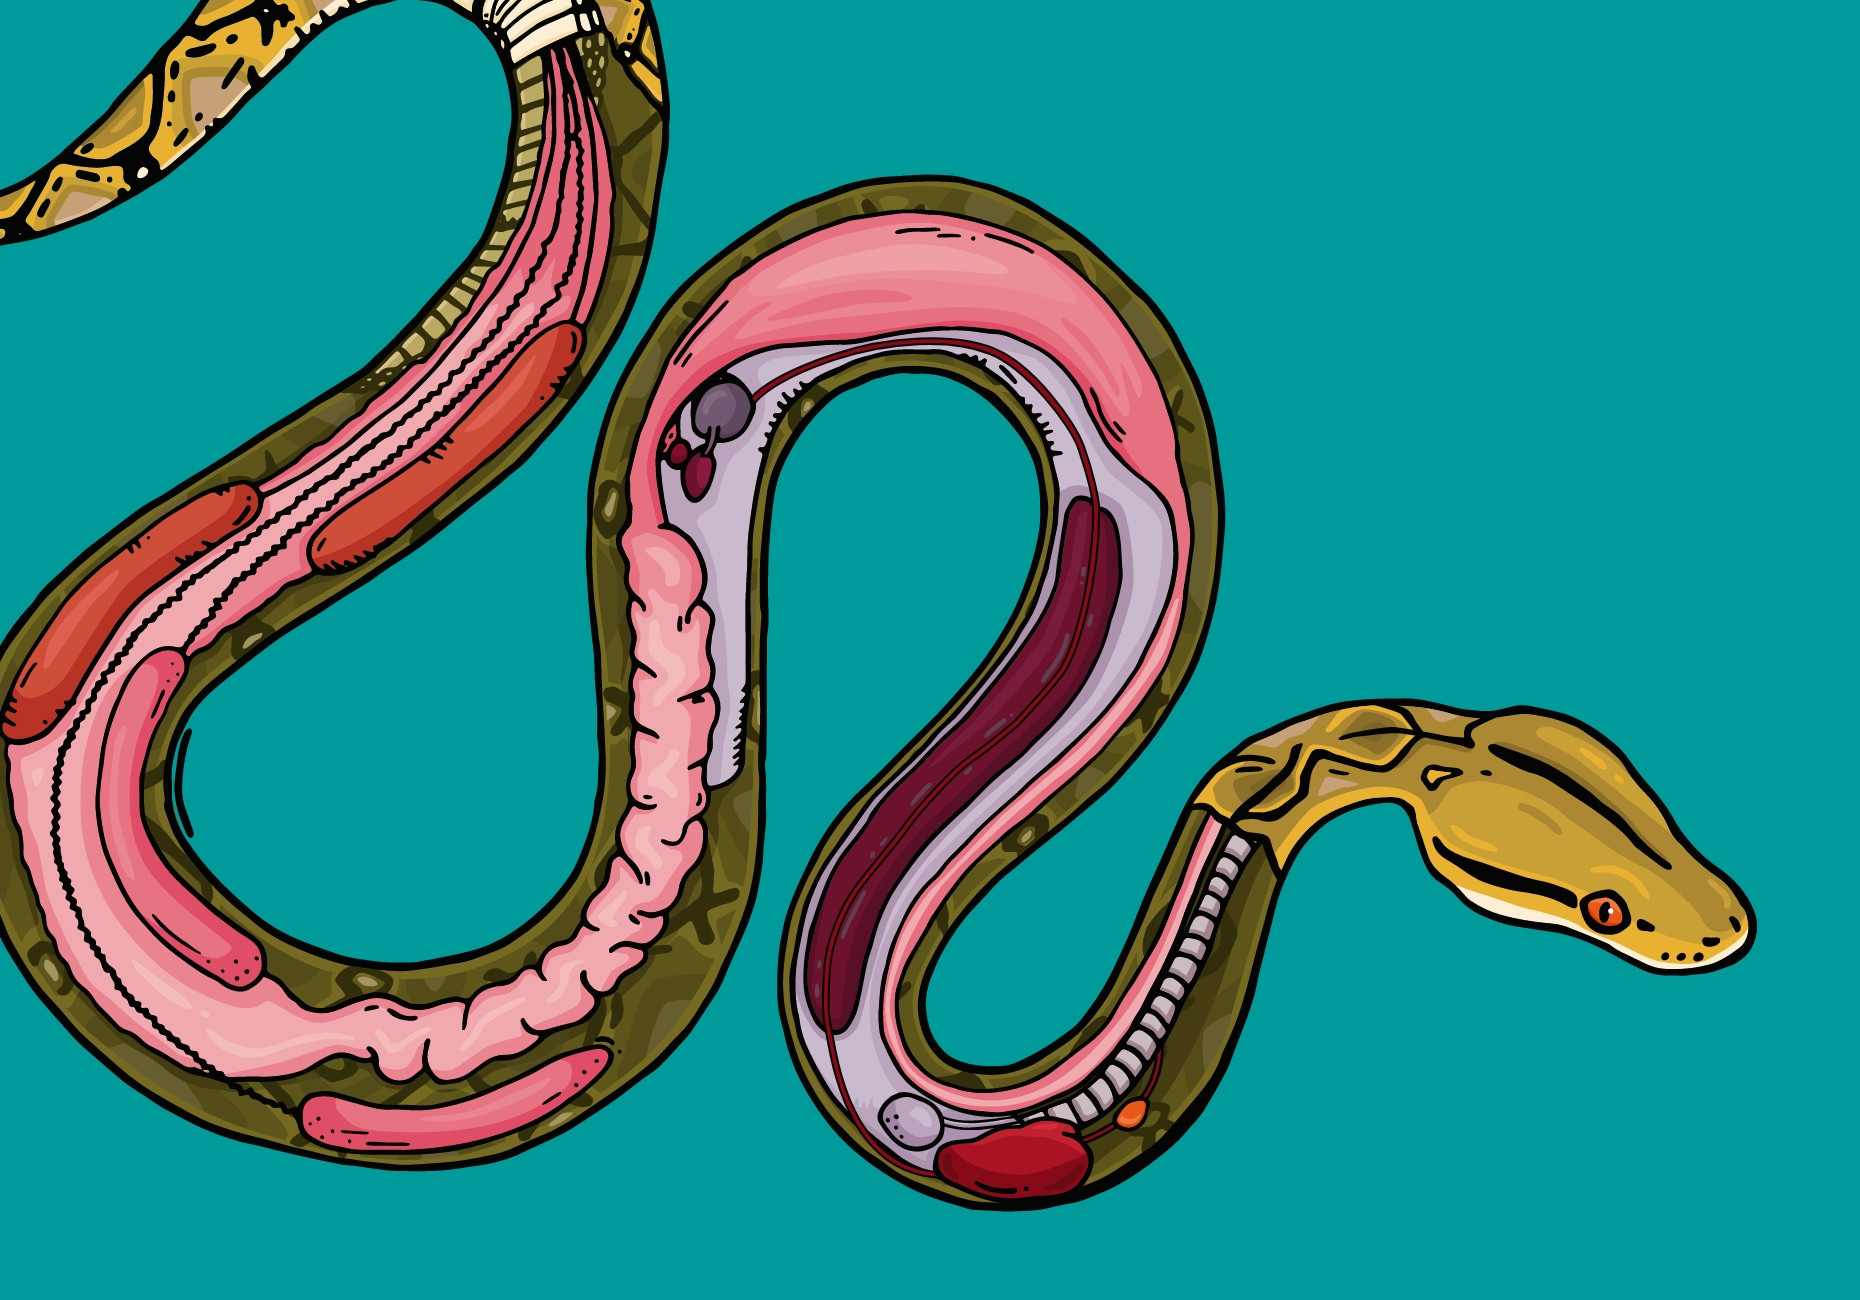 Chester Zoo illustrated snake anatomy design by Root Studio